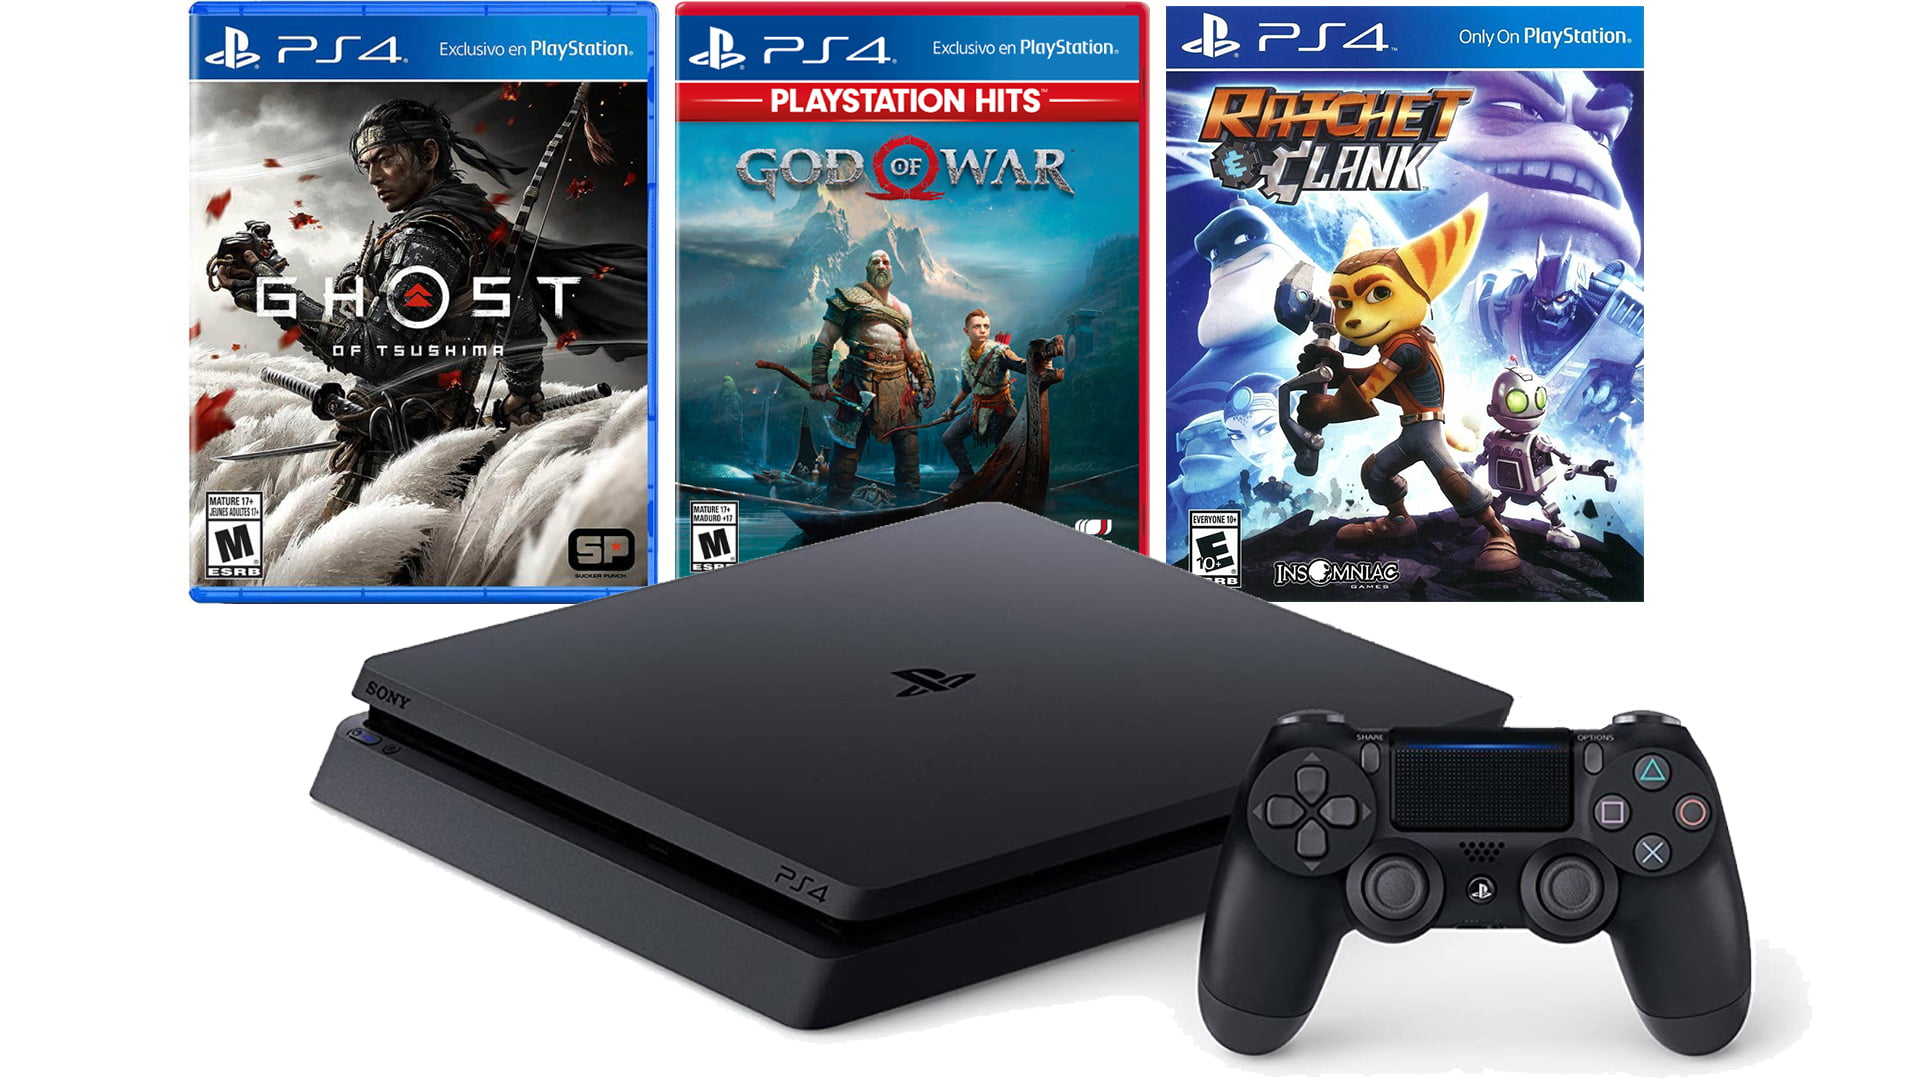 Sony PlayStation 4 Slim PS4 1TB Console MEGAPACK Bundle 3 GAMES included Ghost of Tsushima, God of War 4, Ratchet and Clank, Black